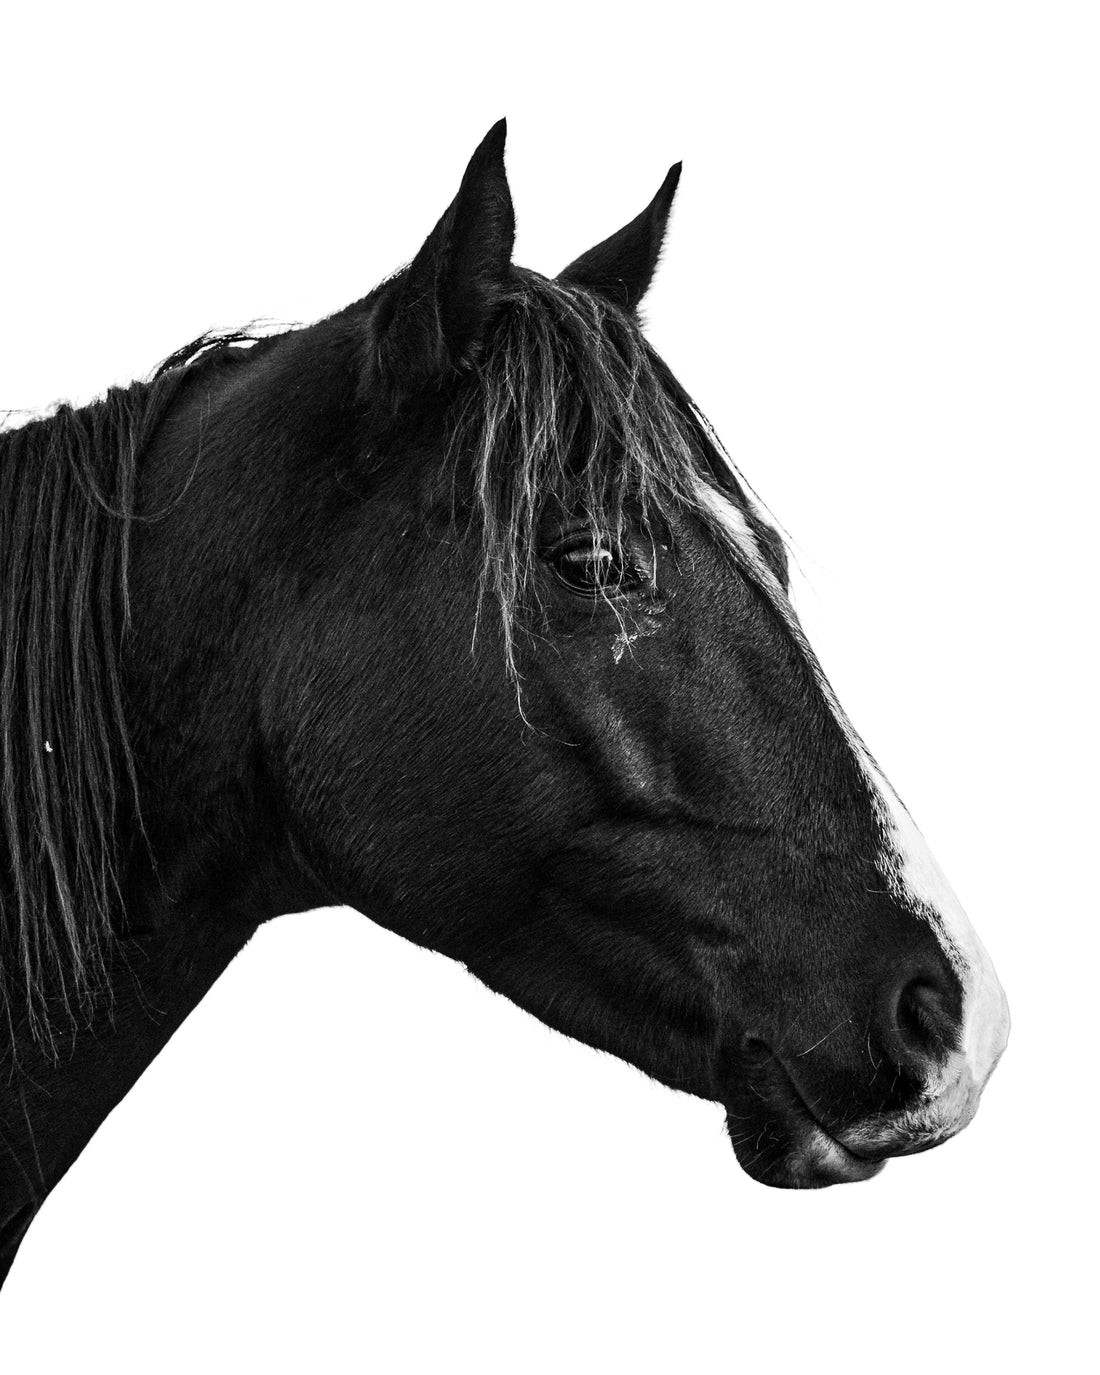 A perfect photo capturing a horse's eye in a black and white photo. Ethan Oberst Photography